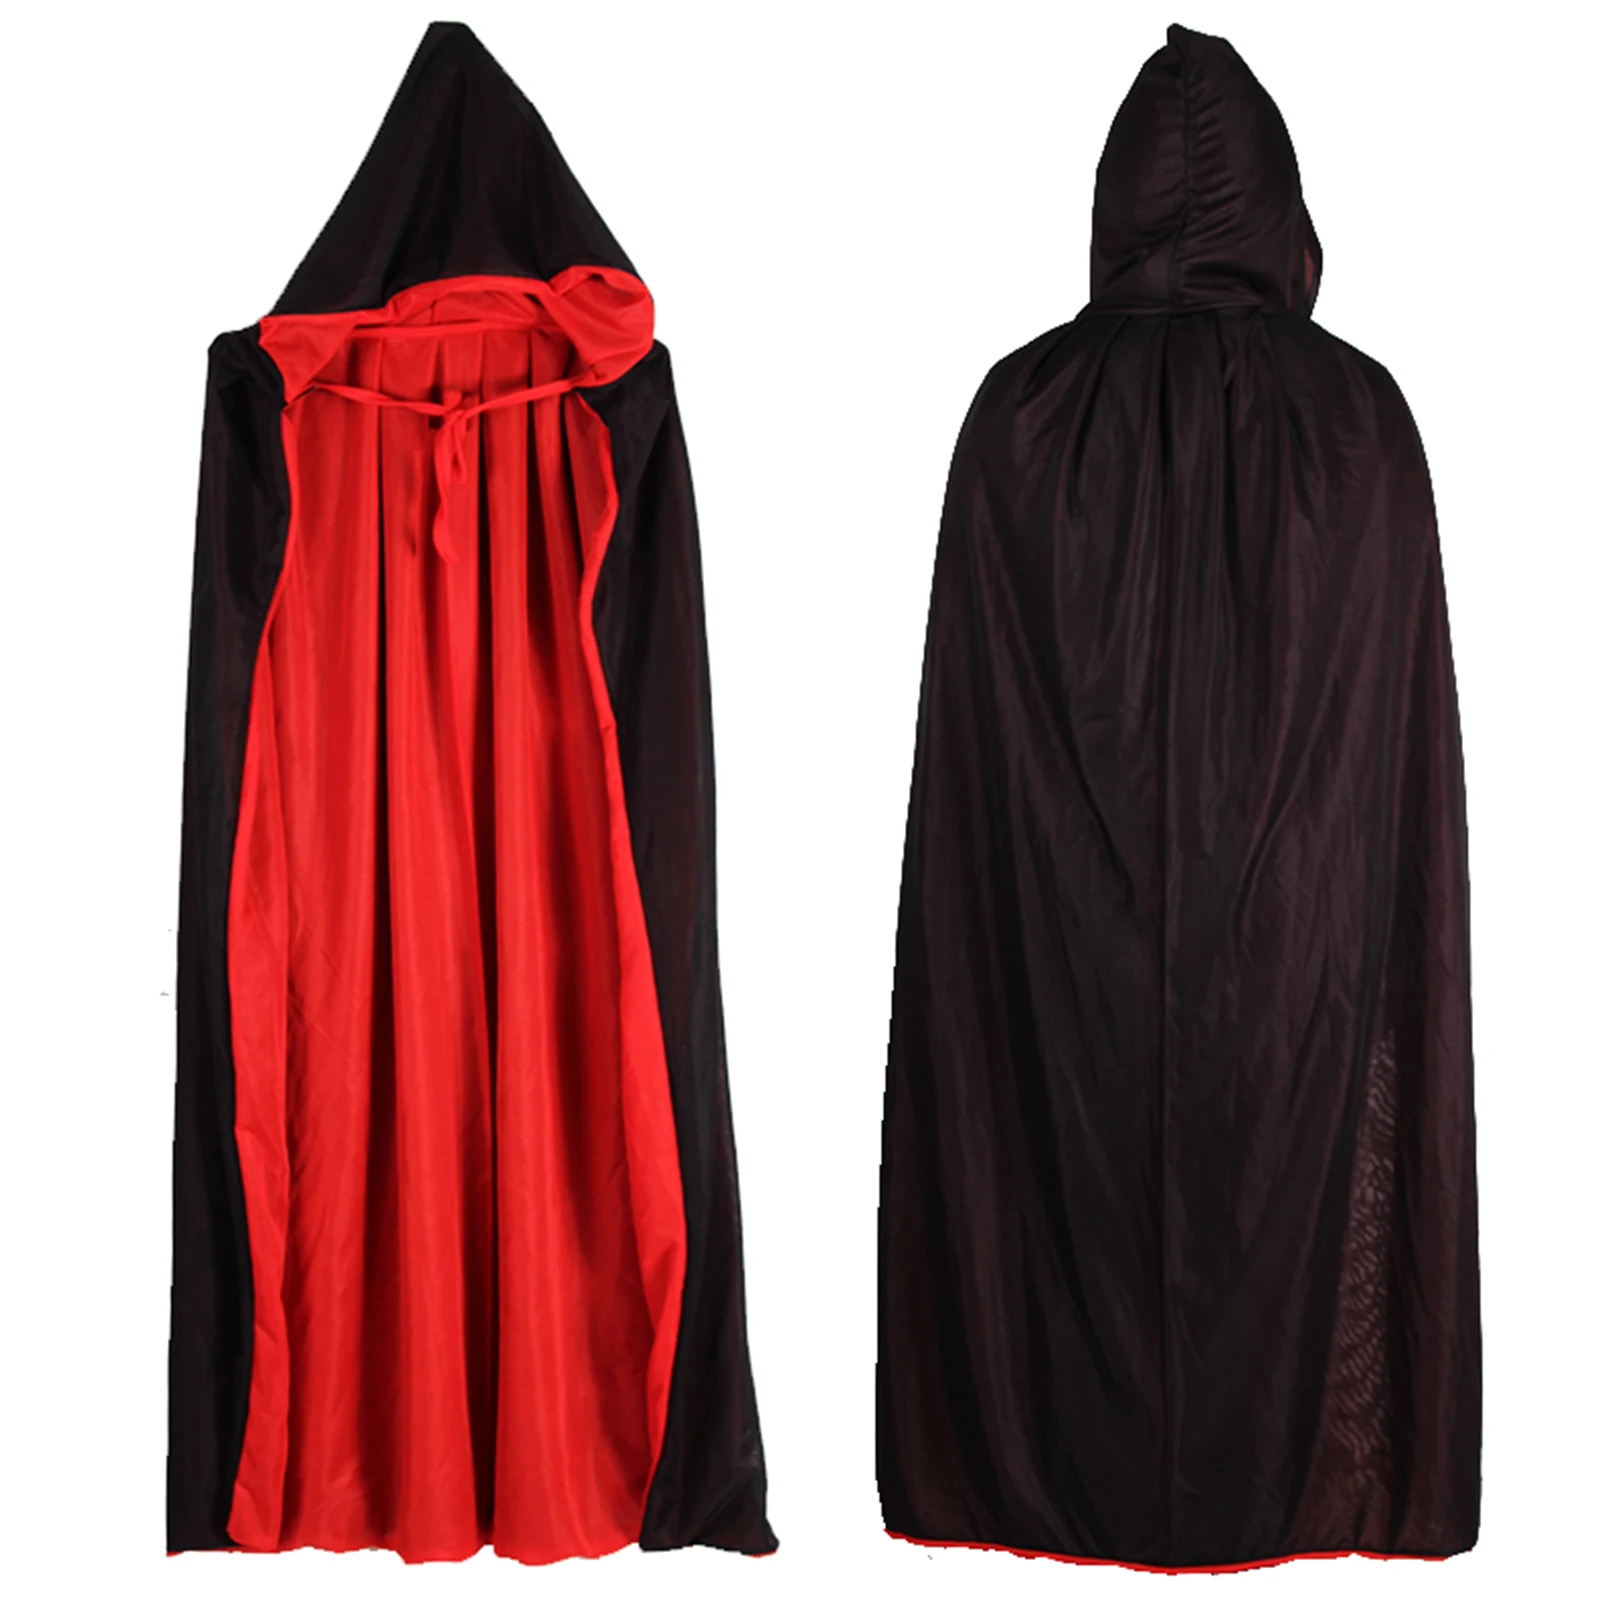 

Hooded Vampire Cape Black Red Cloak Capes Reversible Dress Up Kids Cosplay Wizard Witch Vampires Costume 140cm Length